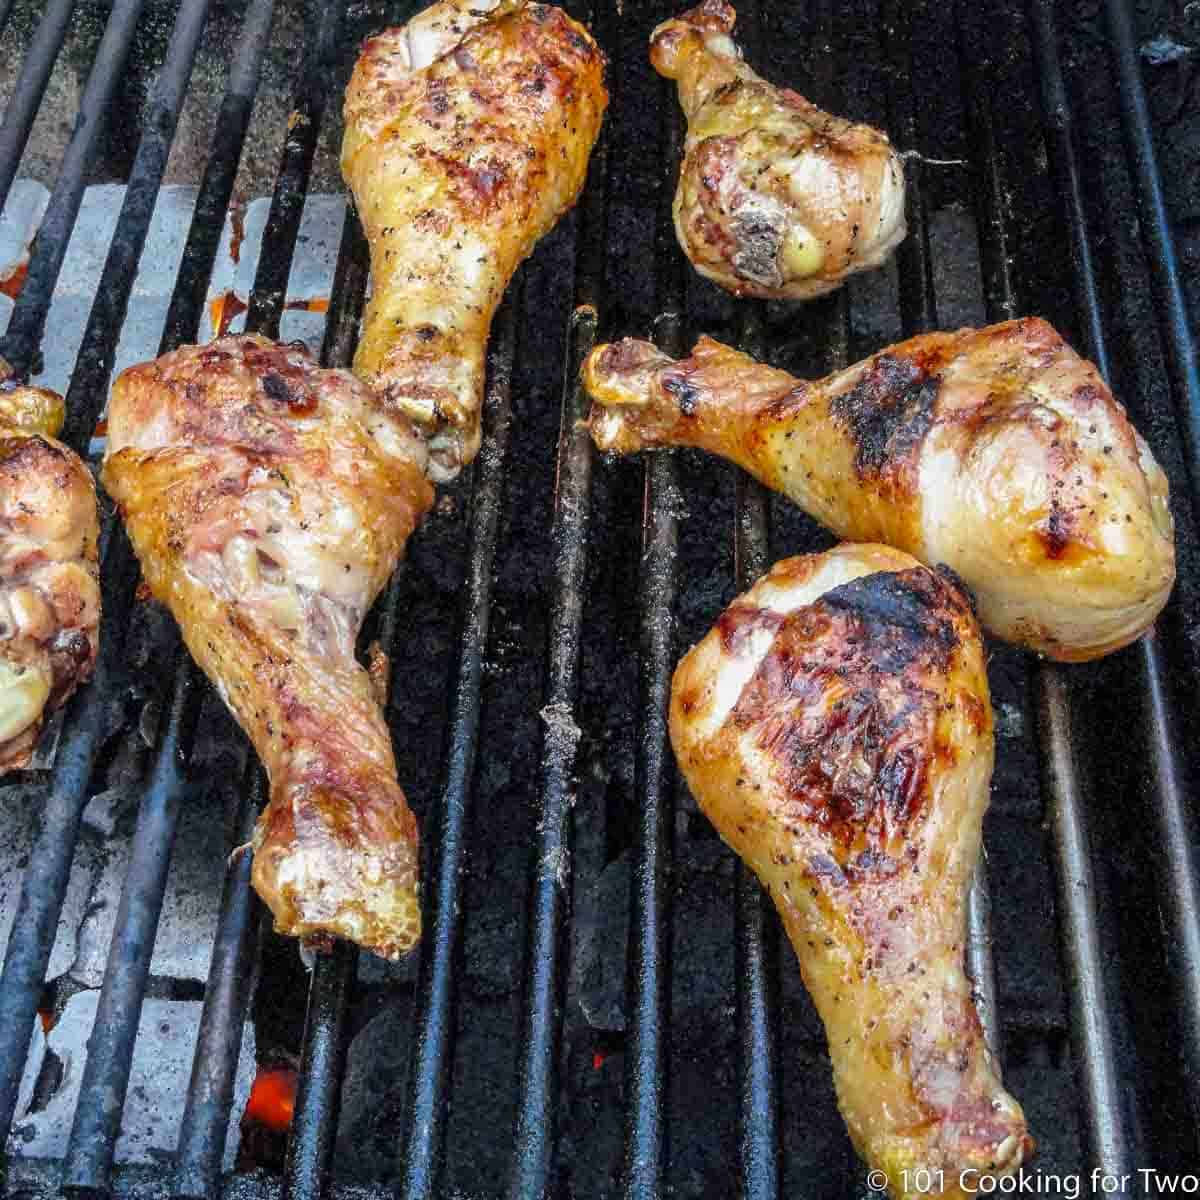 Grilled Chicken Drumsticks - The Art of Drummies | 101 Cooking For Two